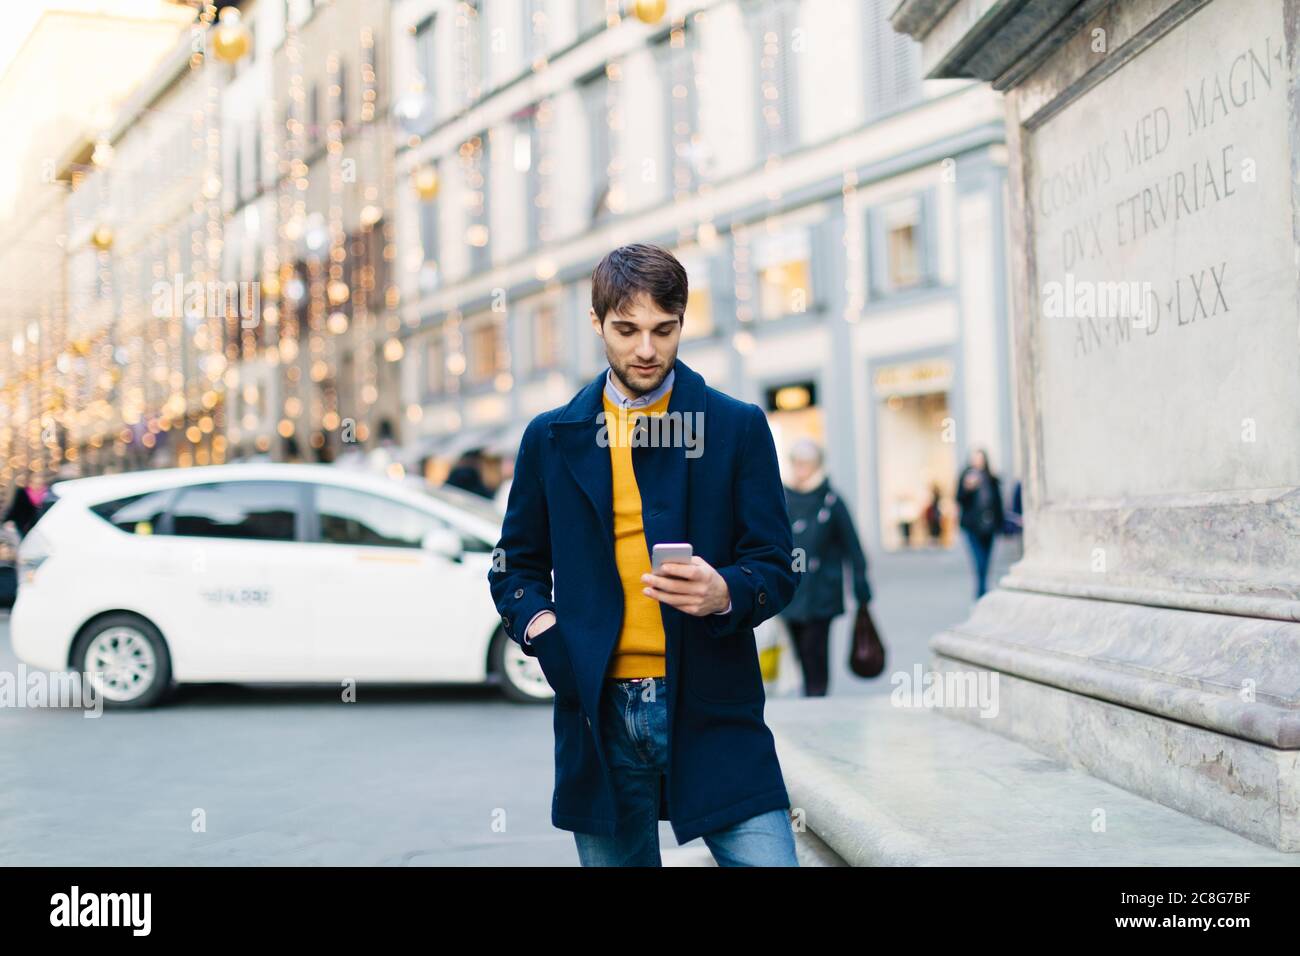 Man using smartphone at piazza, Firenze, Toscana, Italy Stock Photo